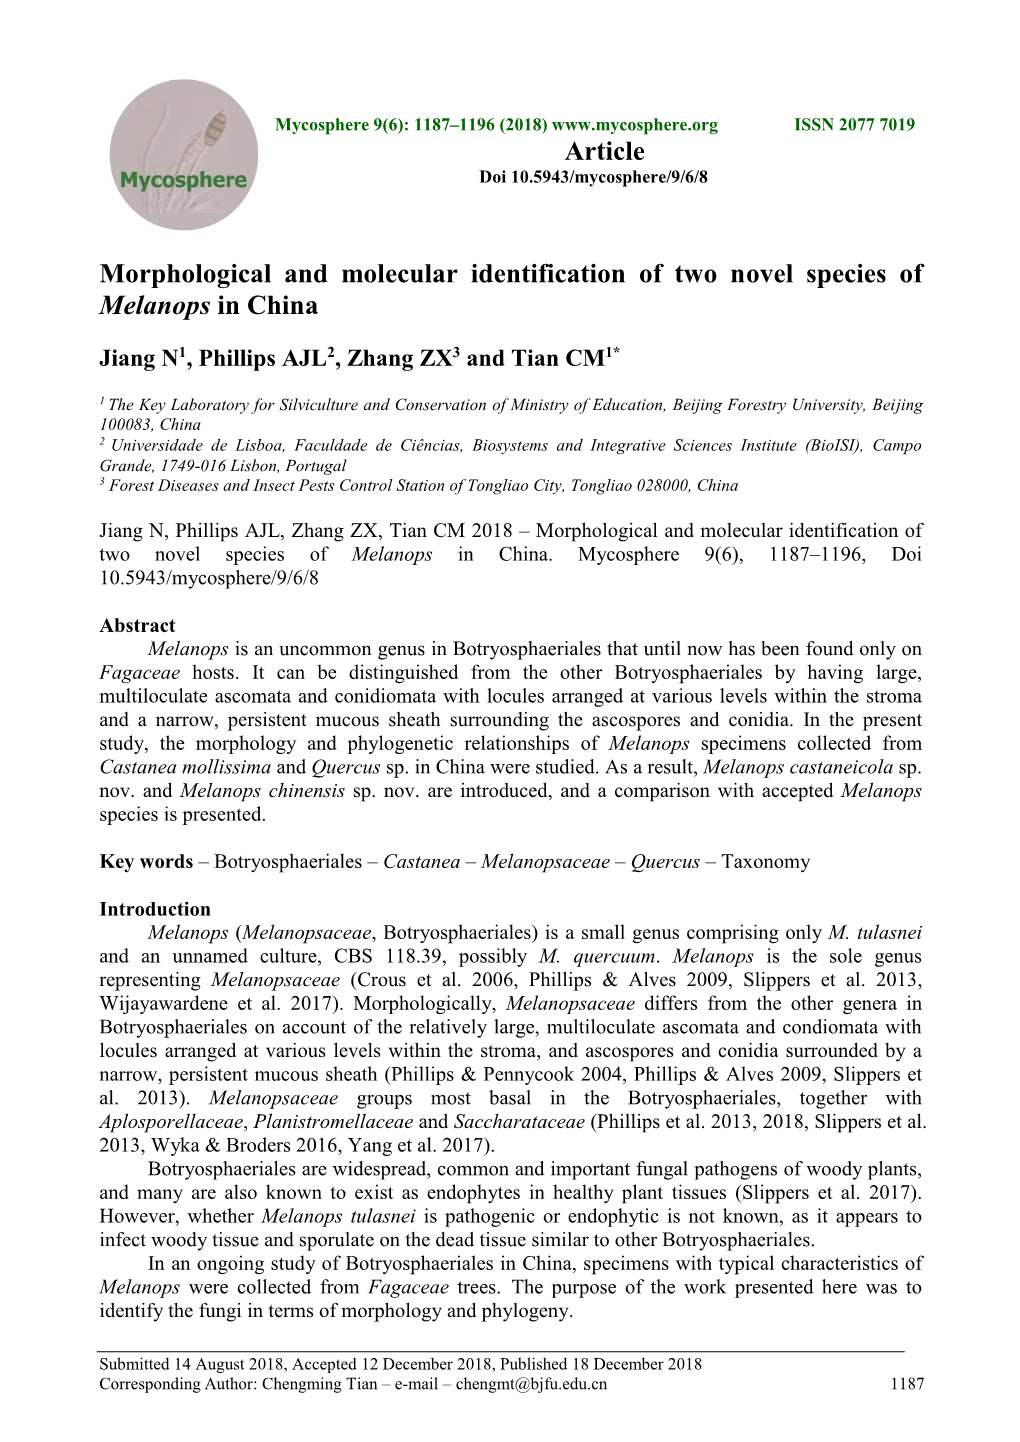 Morphological and Molecular Identification of Two Novel Species of Melanops in China